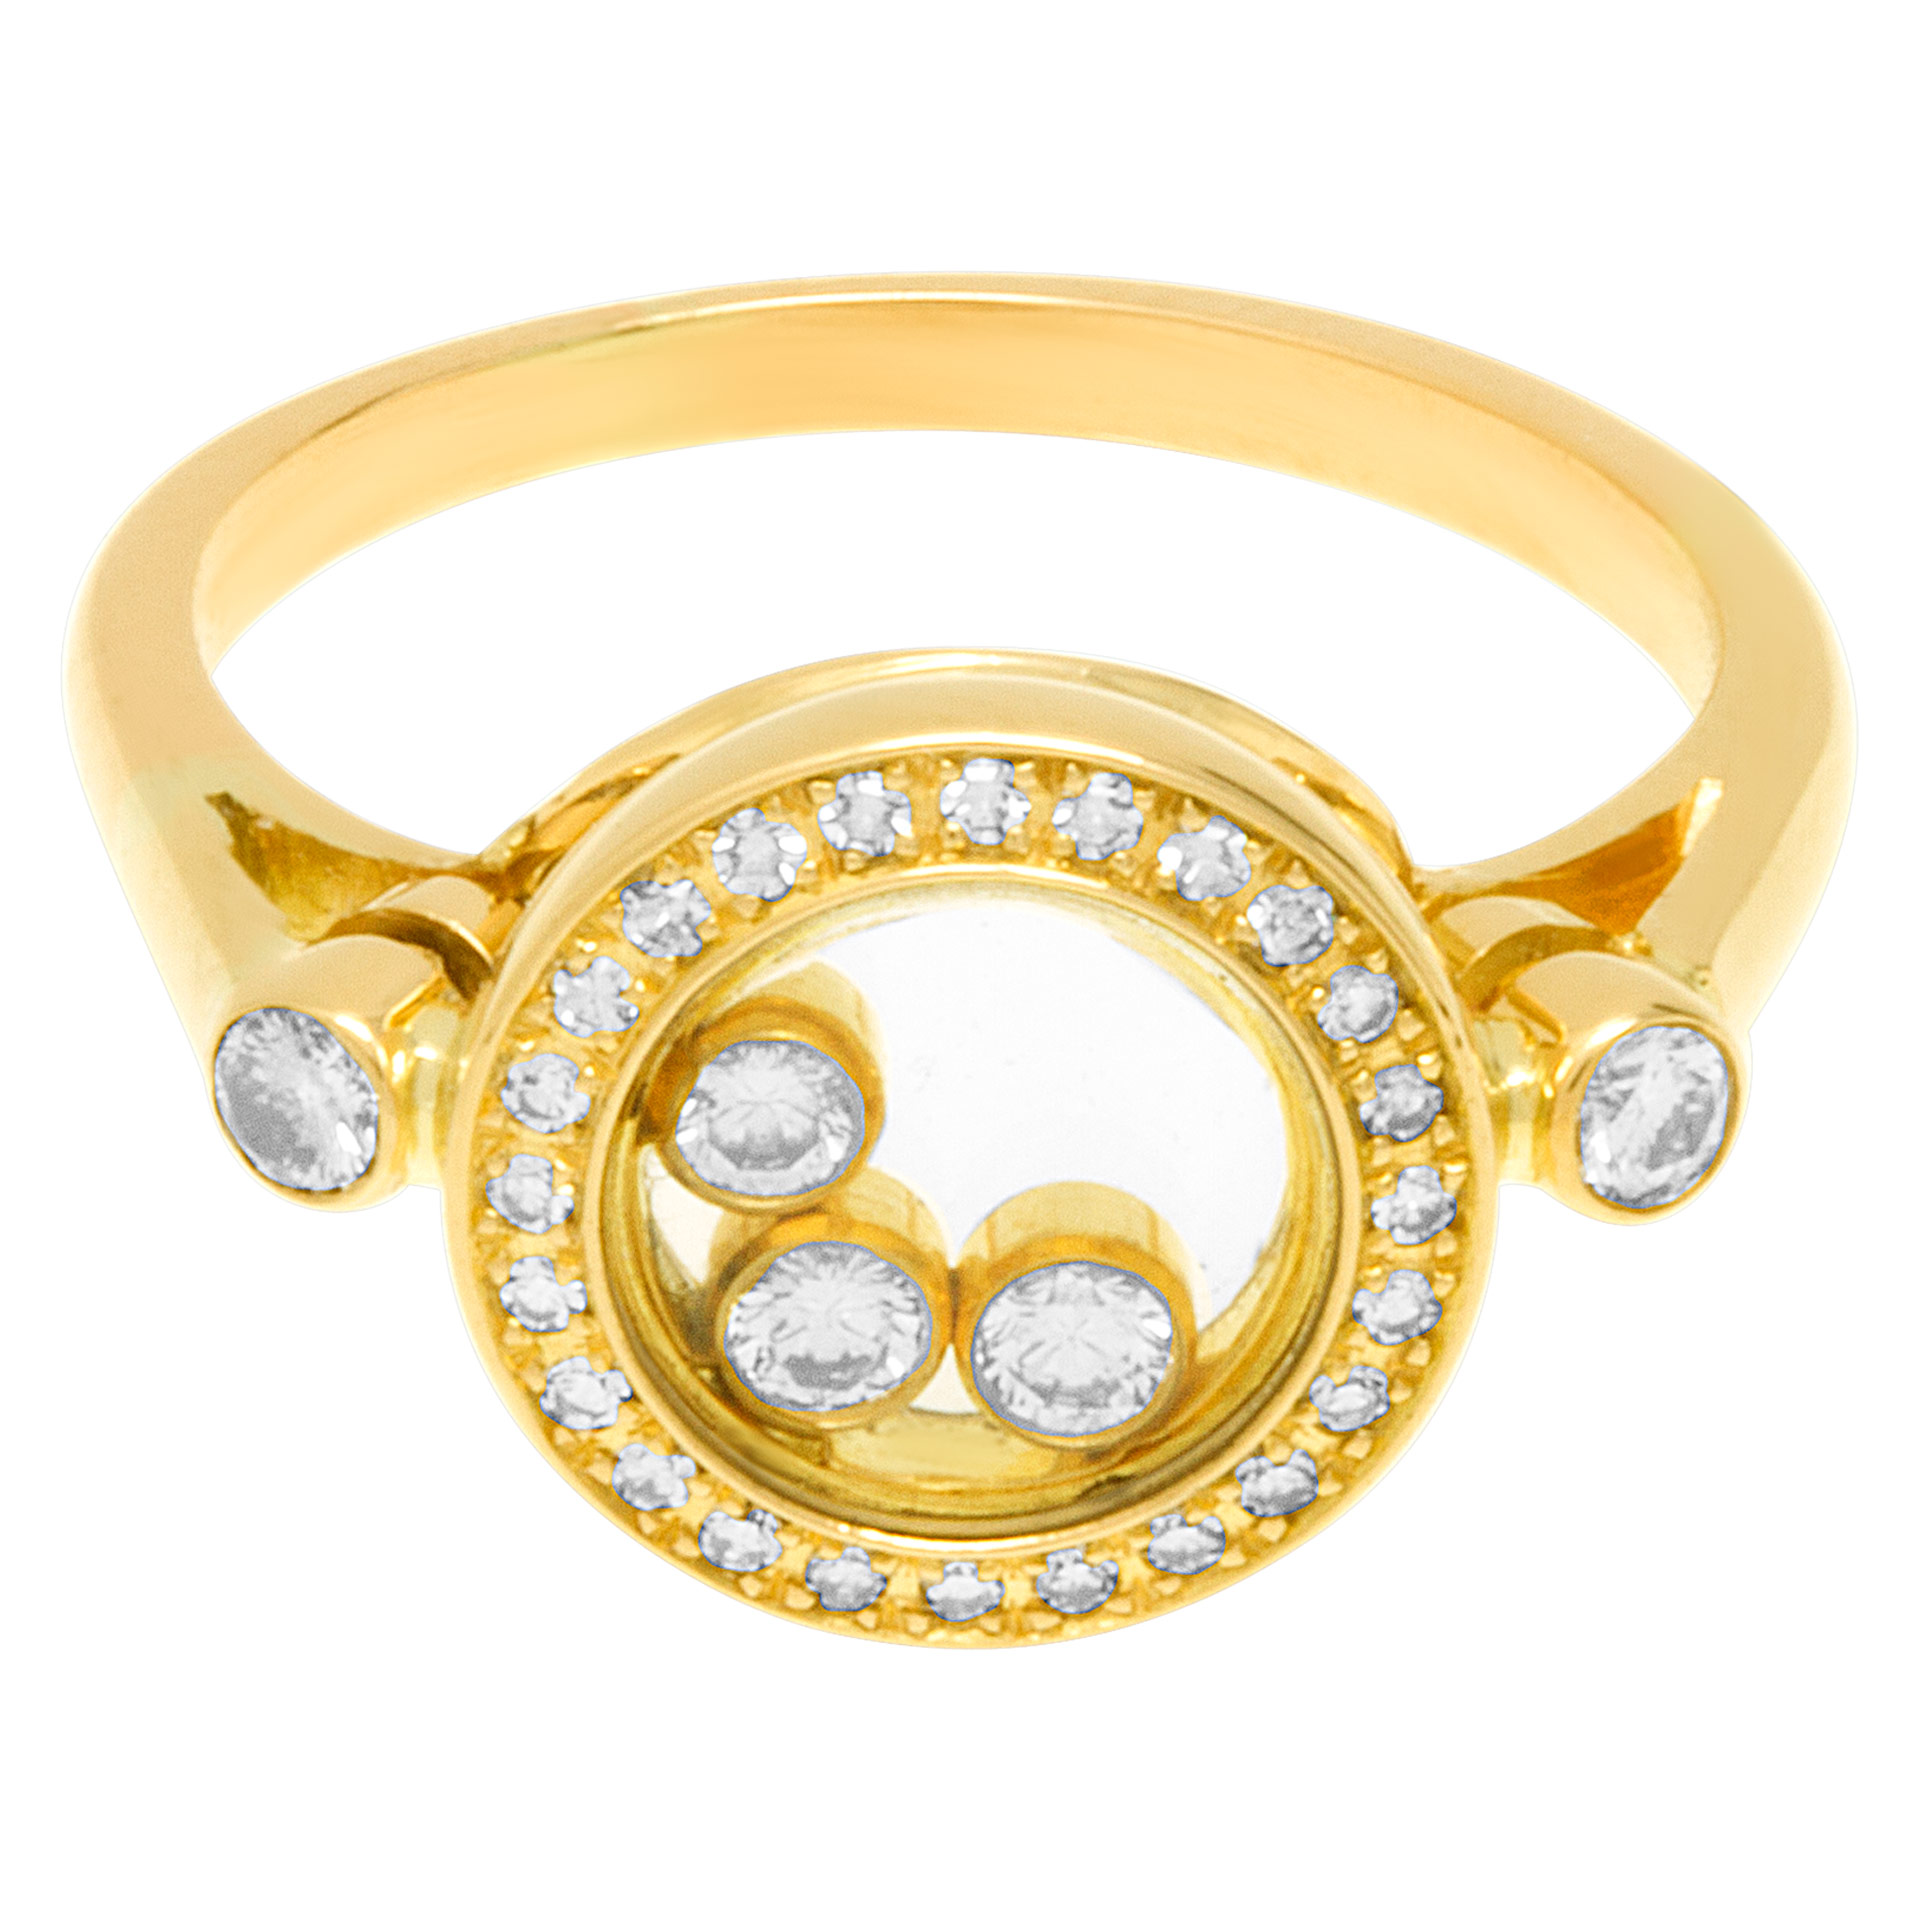 Chopard Happy Diamonds ring in 18k yellow gold with 3 floating diamonds